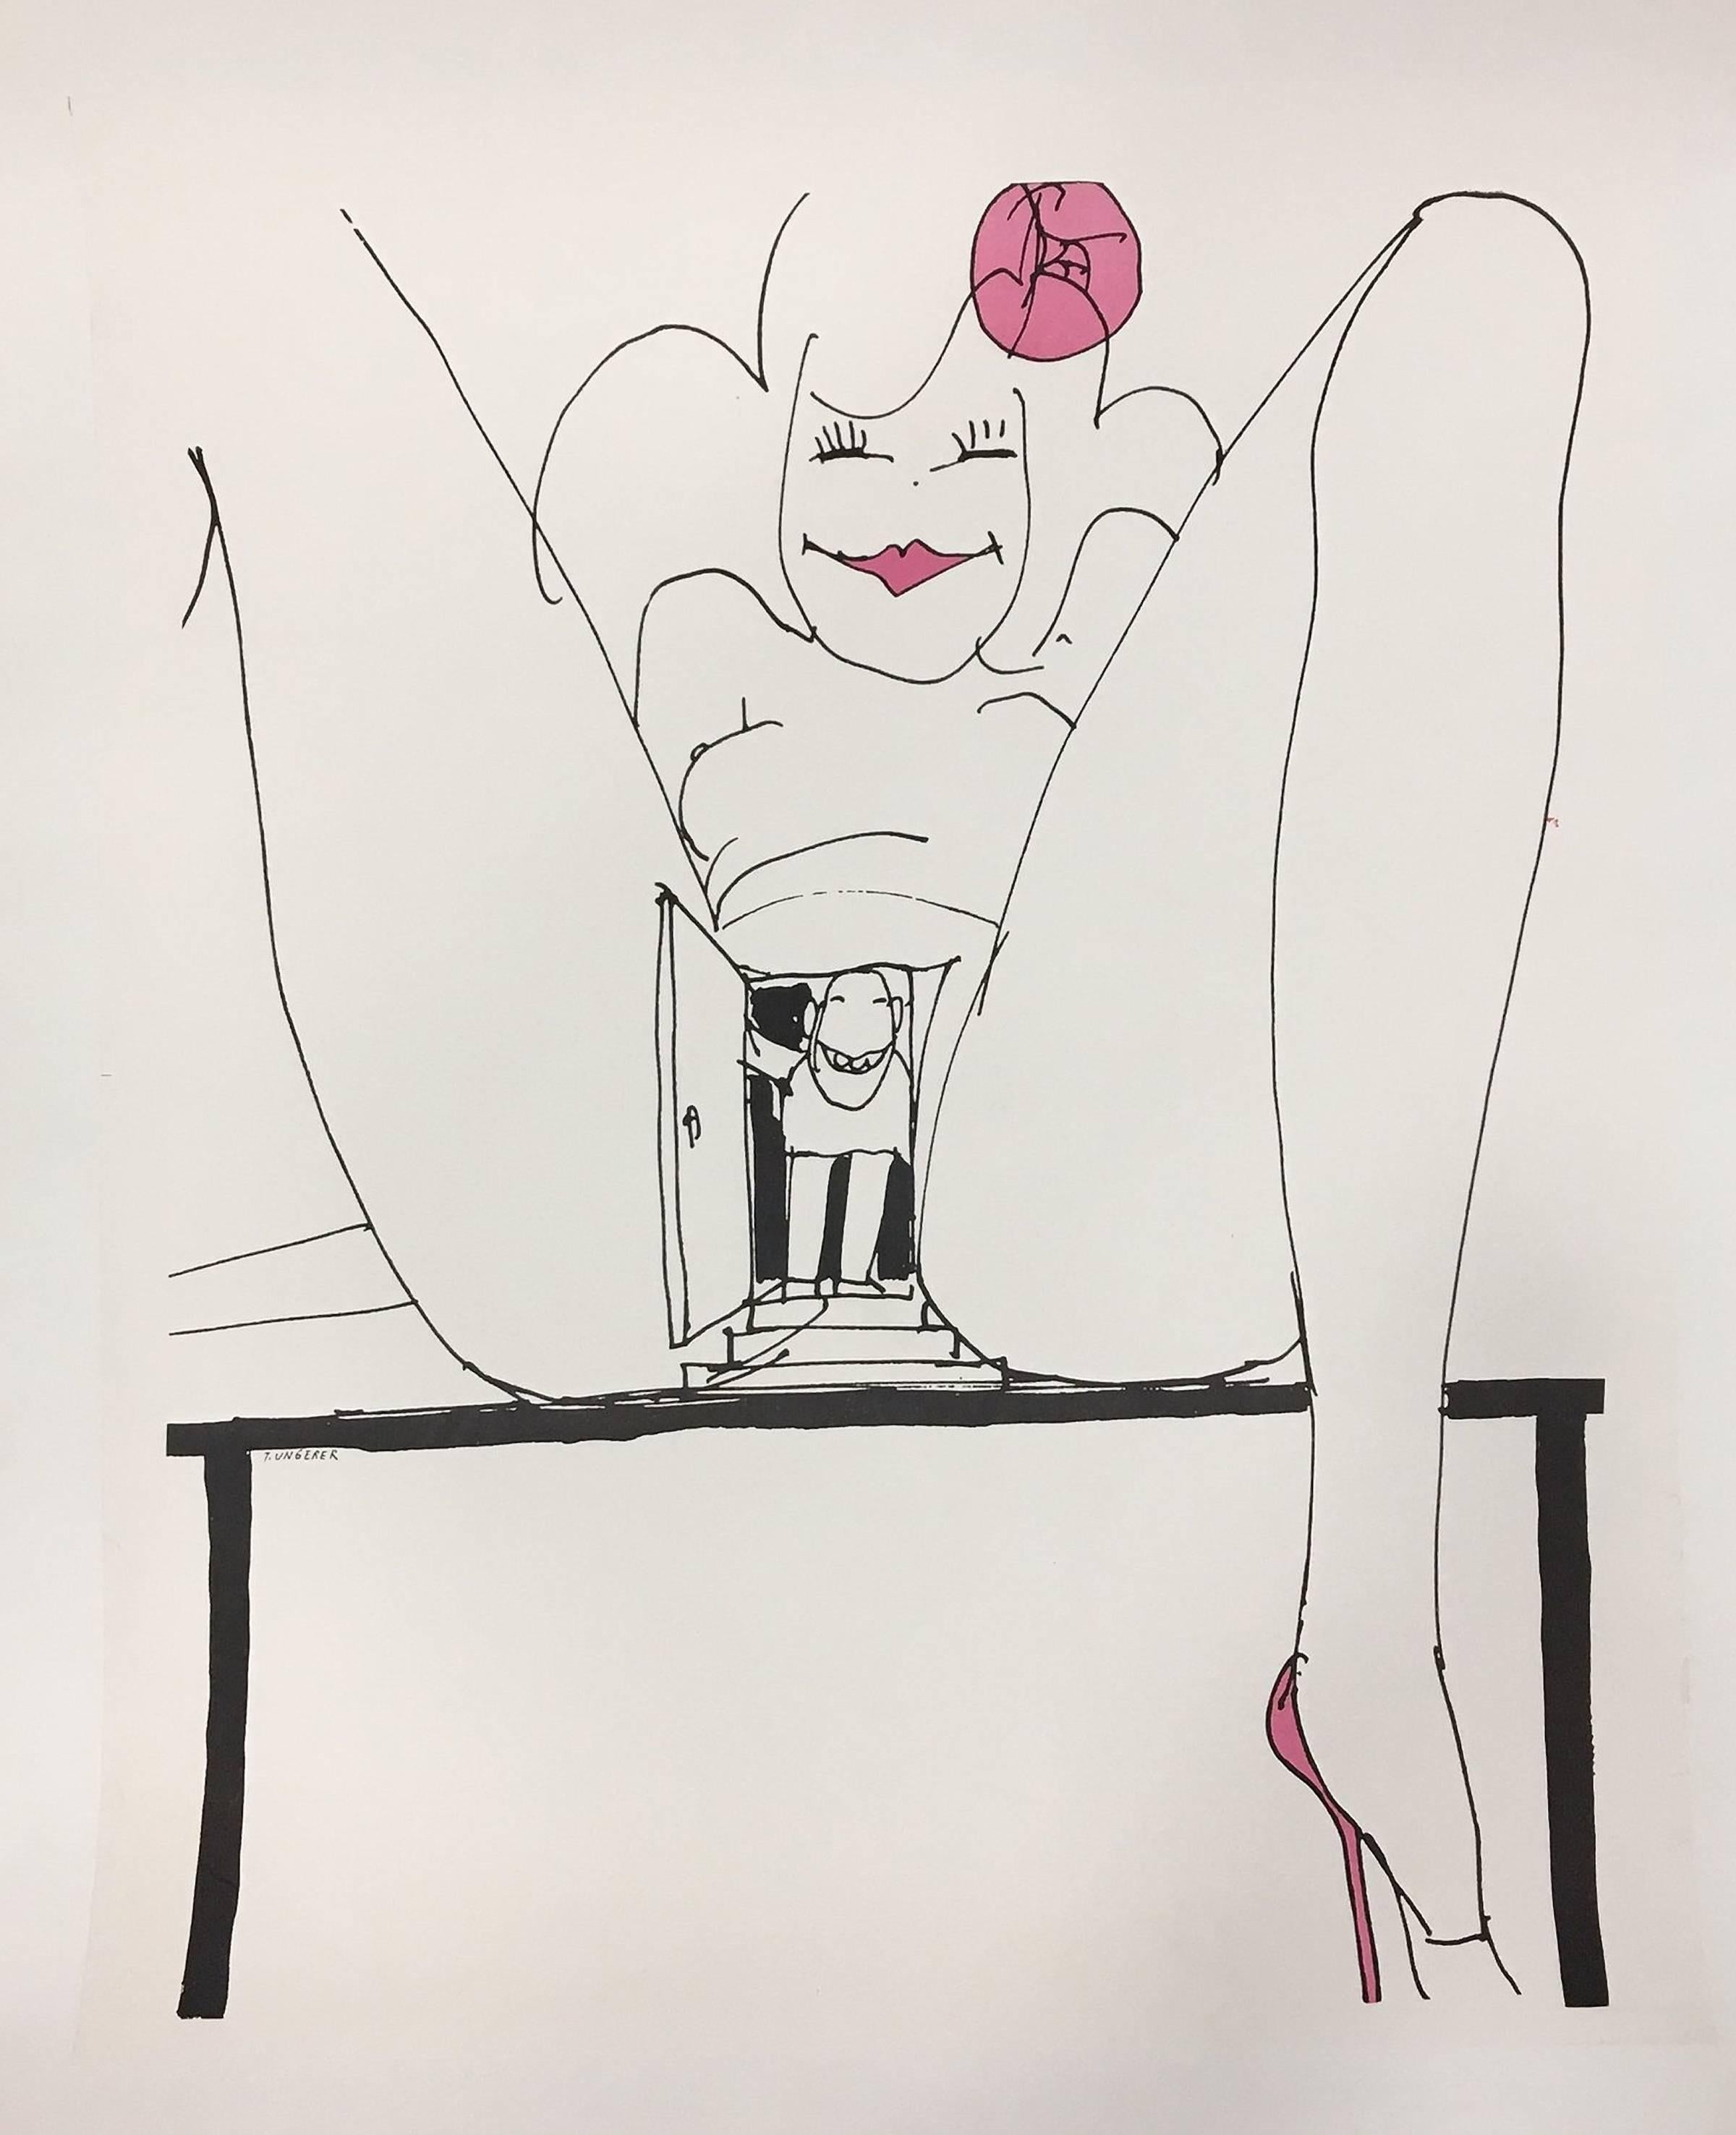 Tomi Ungerer Print - CALLING CARD - BY TOMI UNGERER - (RIP) - PLEASE READ BIO IN LINK - VERY RARE